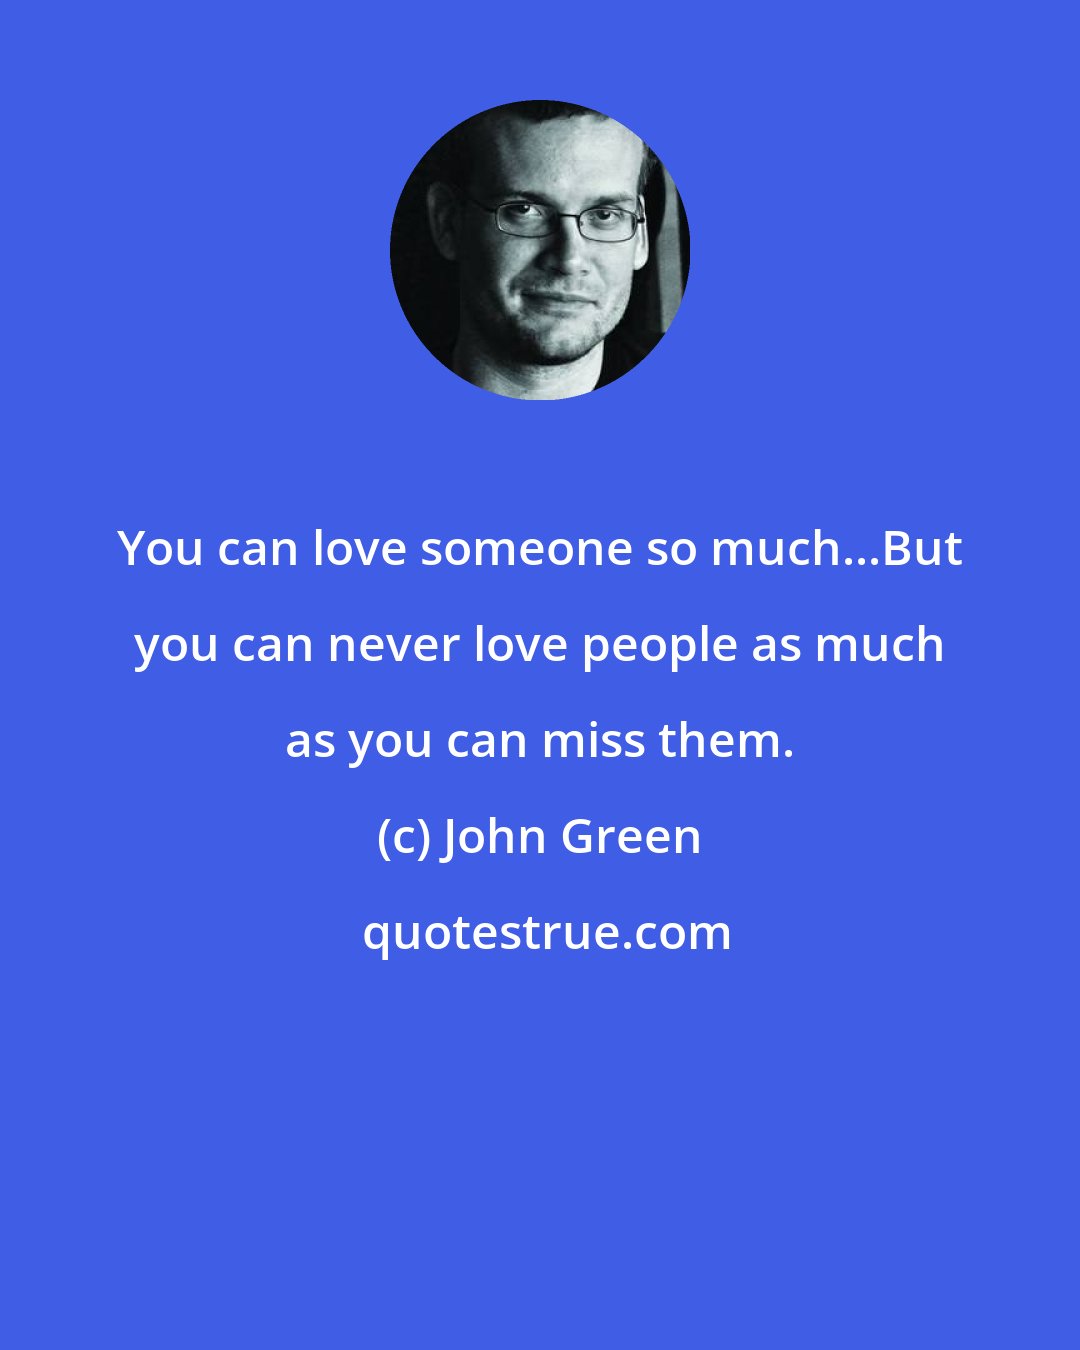 John Green: You can love someone so much...But you can never love people as much as you can miss them.